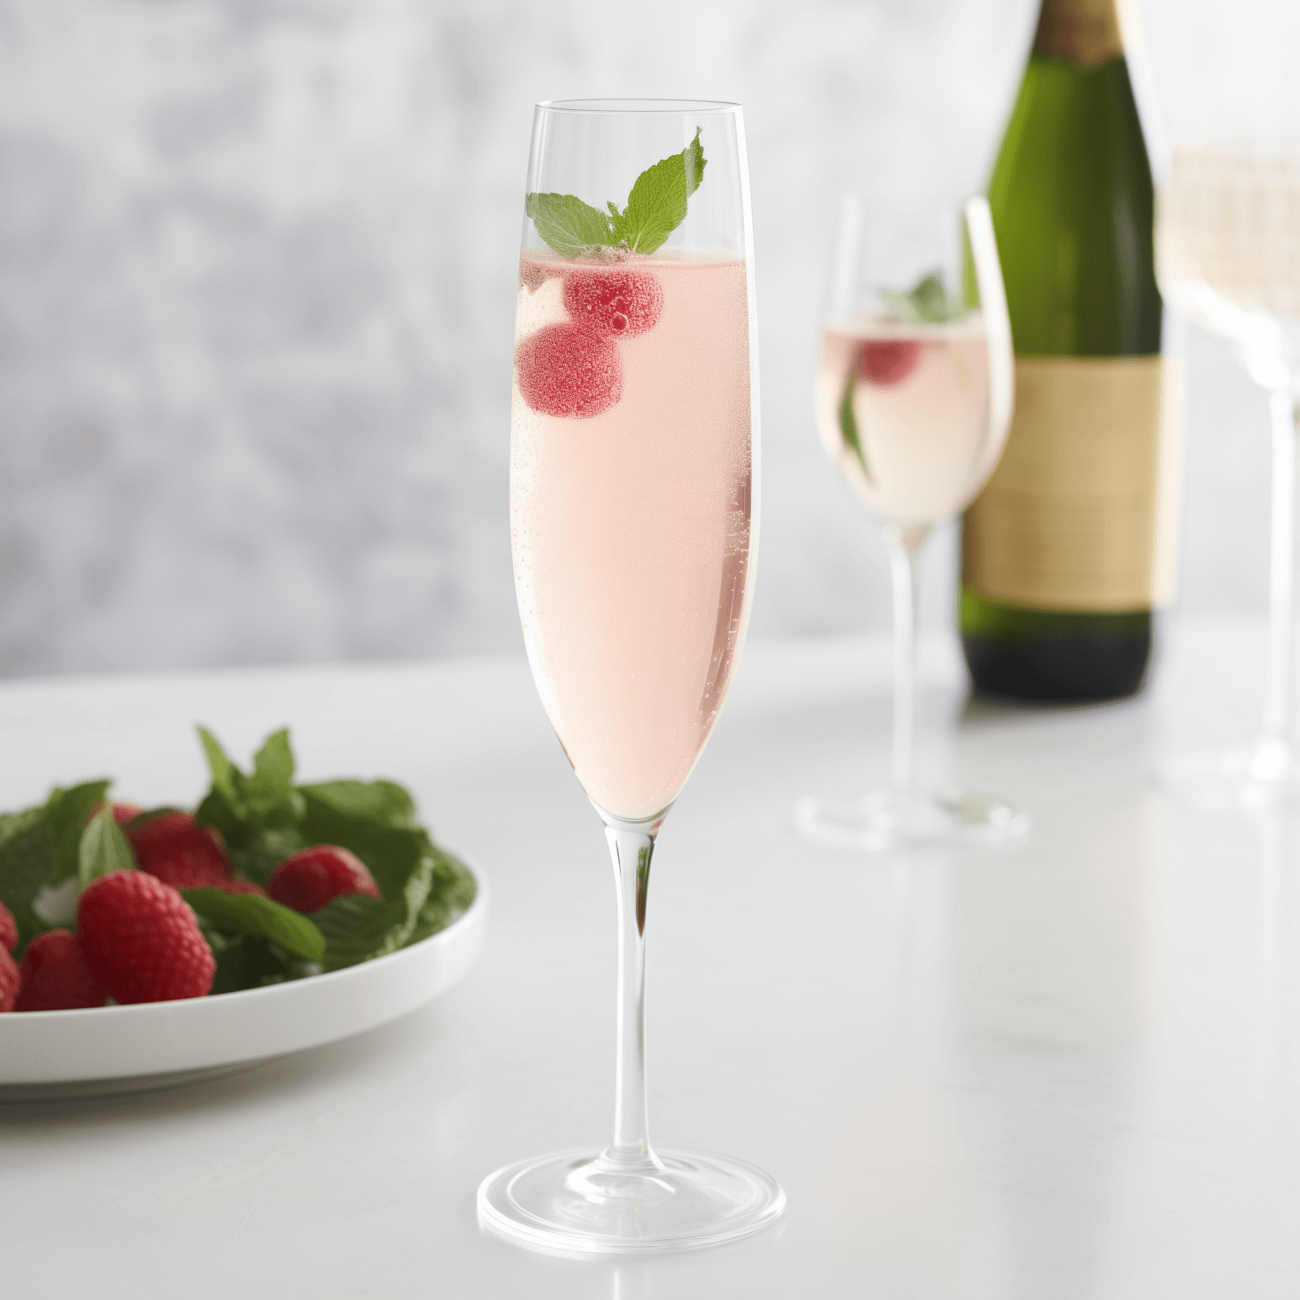 Blushing Bride Cocktail Recipe - The Blushing Bride cocktail is a delightful balance of sweet and sour. The raspberry mix adds a fruity sweetness, which is perfectly balanced by the tartness of the sweet & sour mix. The vodka gives it a bit of a kick, while the champagne or prosecco adds a bubbly, festive touch.